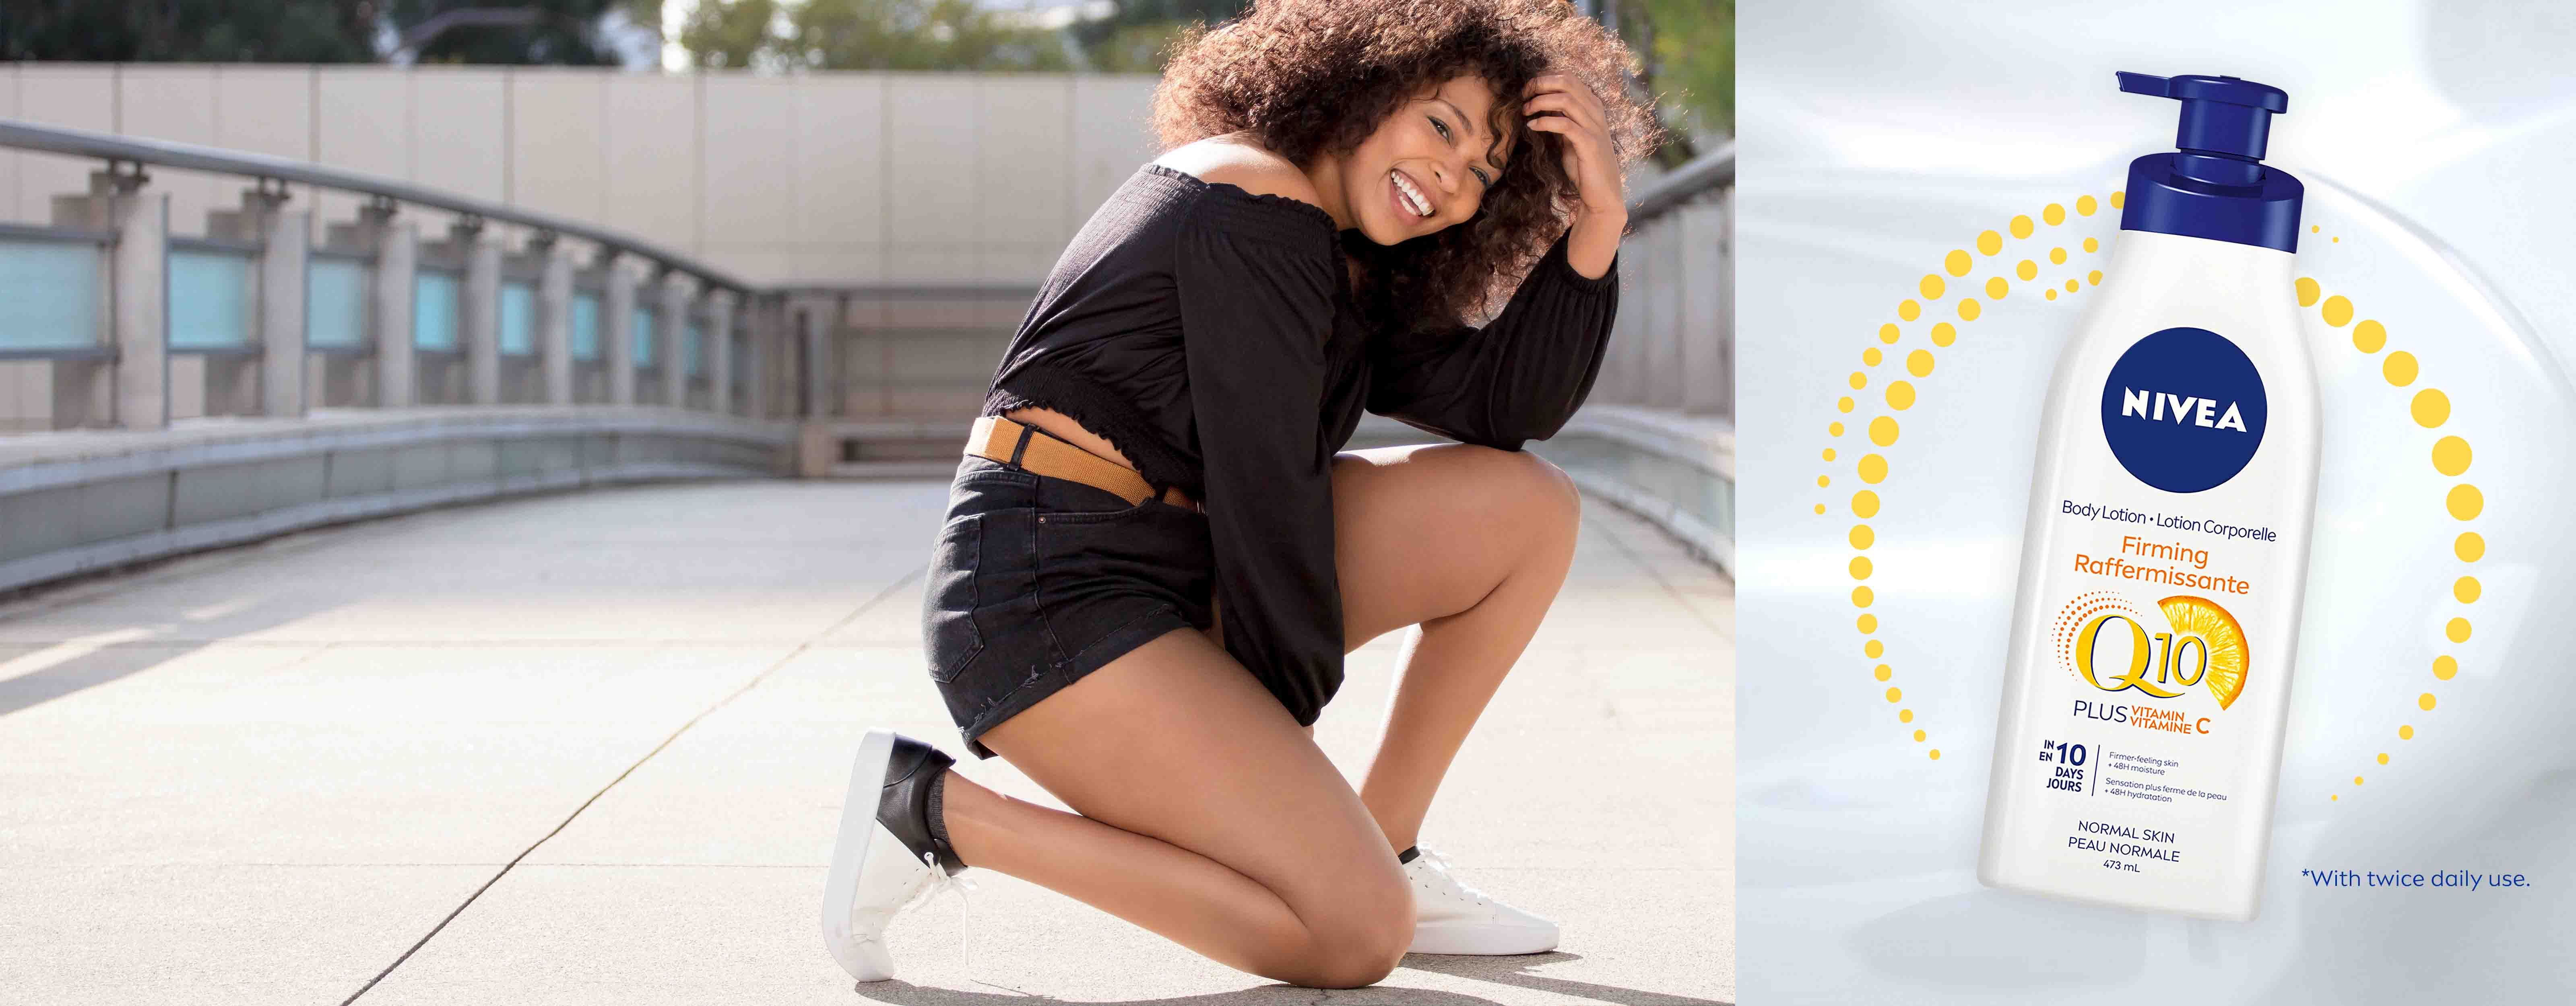 *with twice daily use. A view of a female model wearing dark-coloured clothing kneeling down on concrete with a Nivea Q10 Plus Vitamin C Body Lotion product shown to the right.